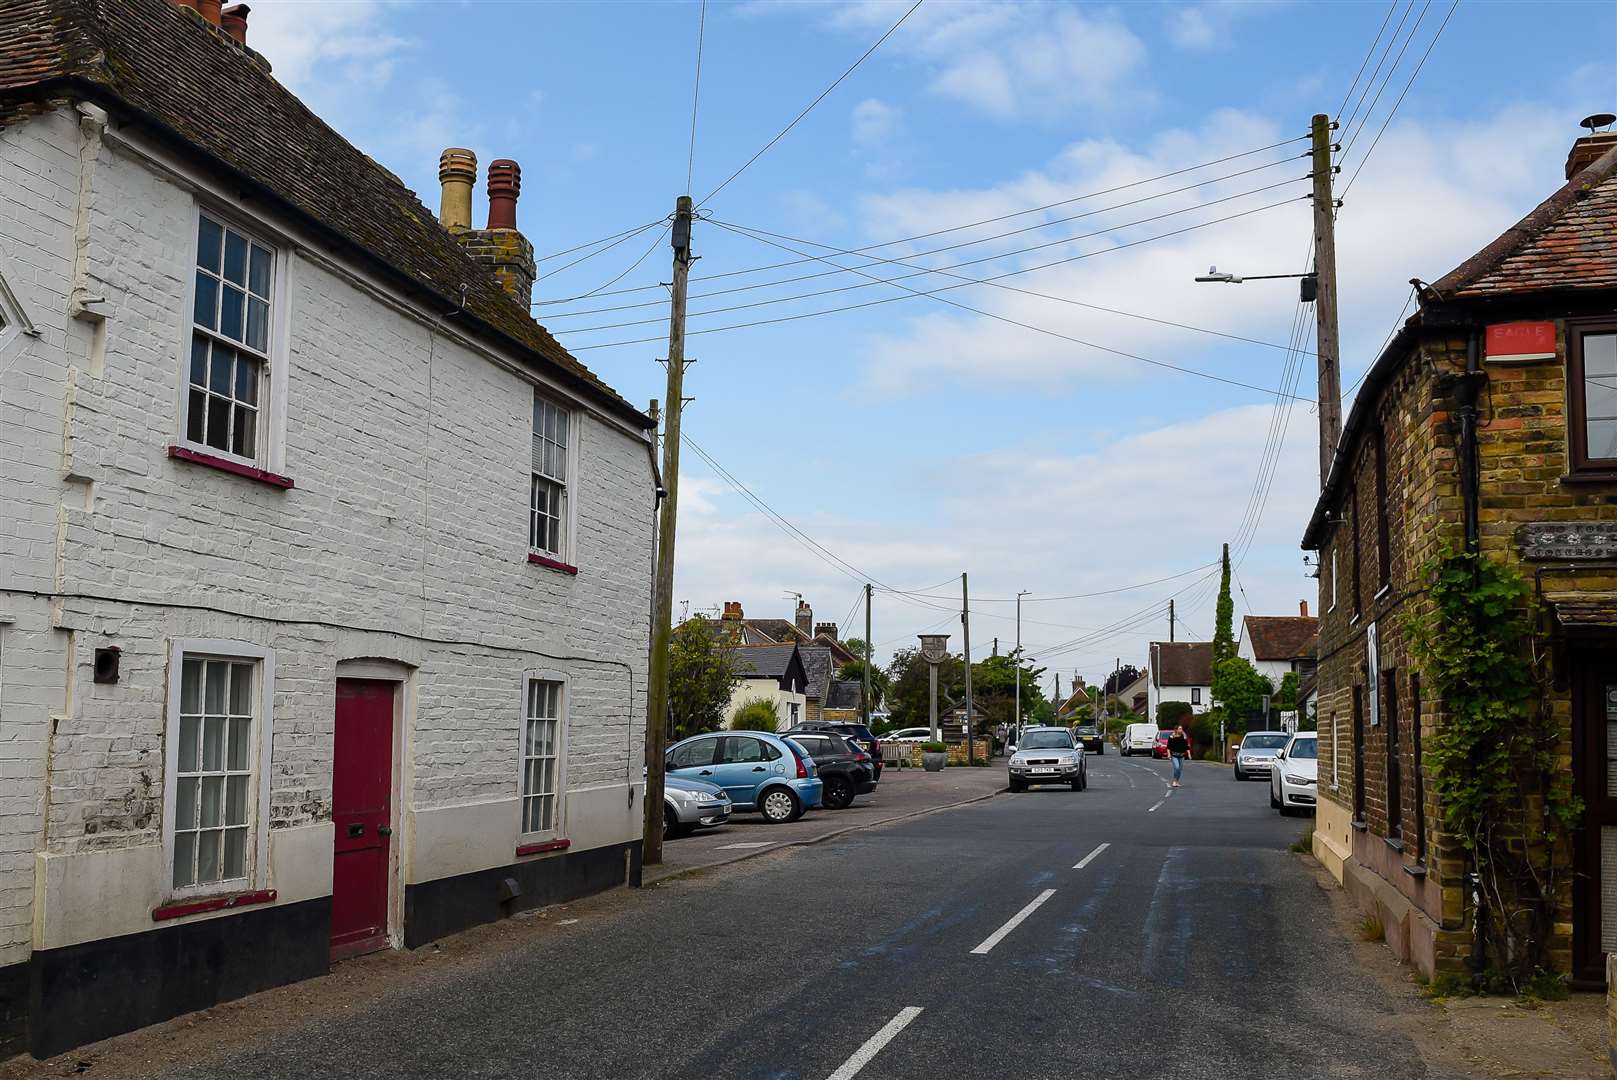 The village of Monkton, between Ramsgate and Canterbury